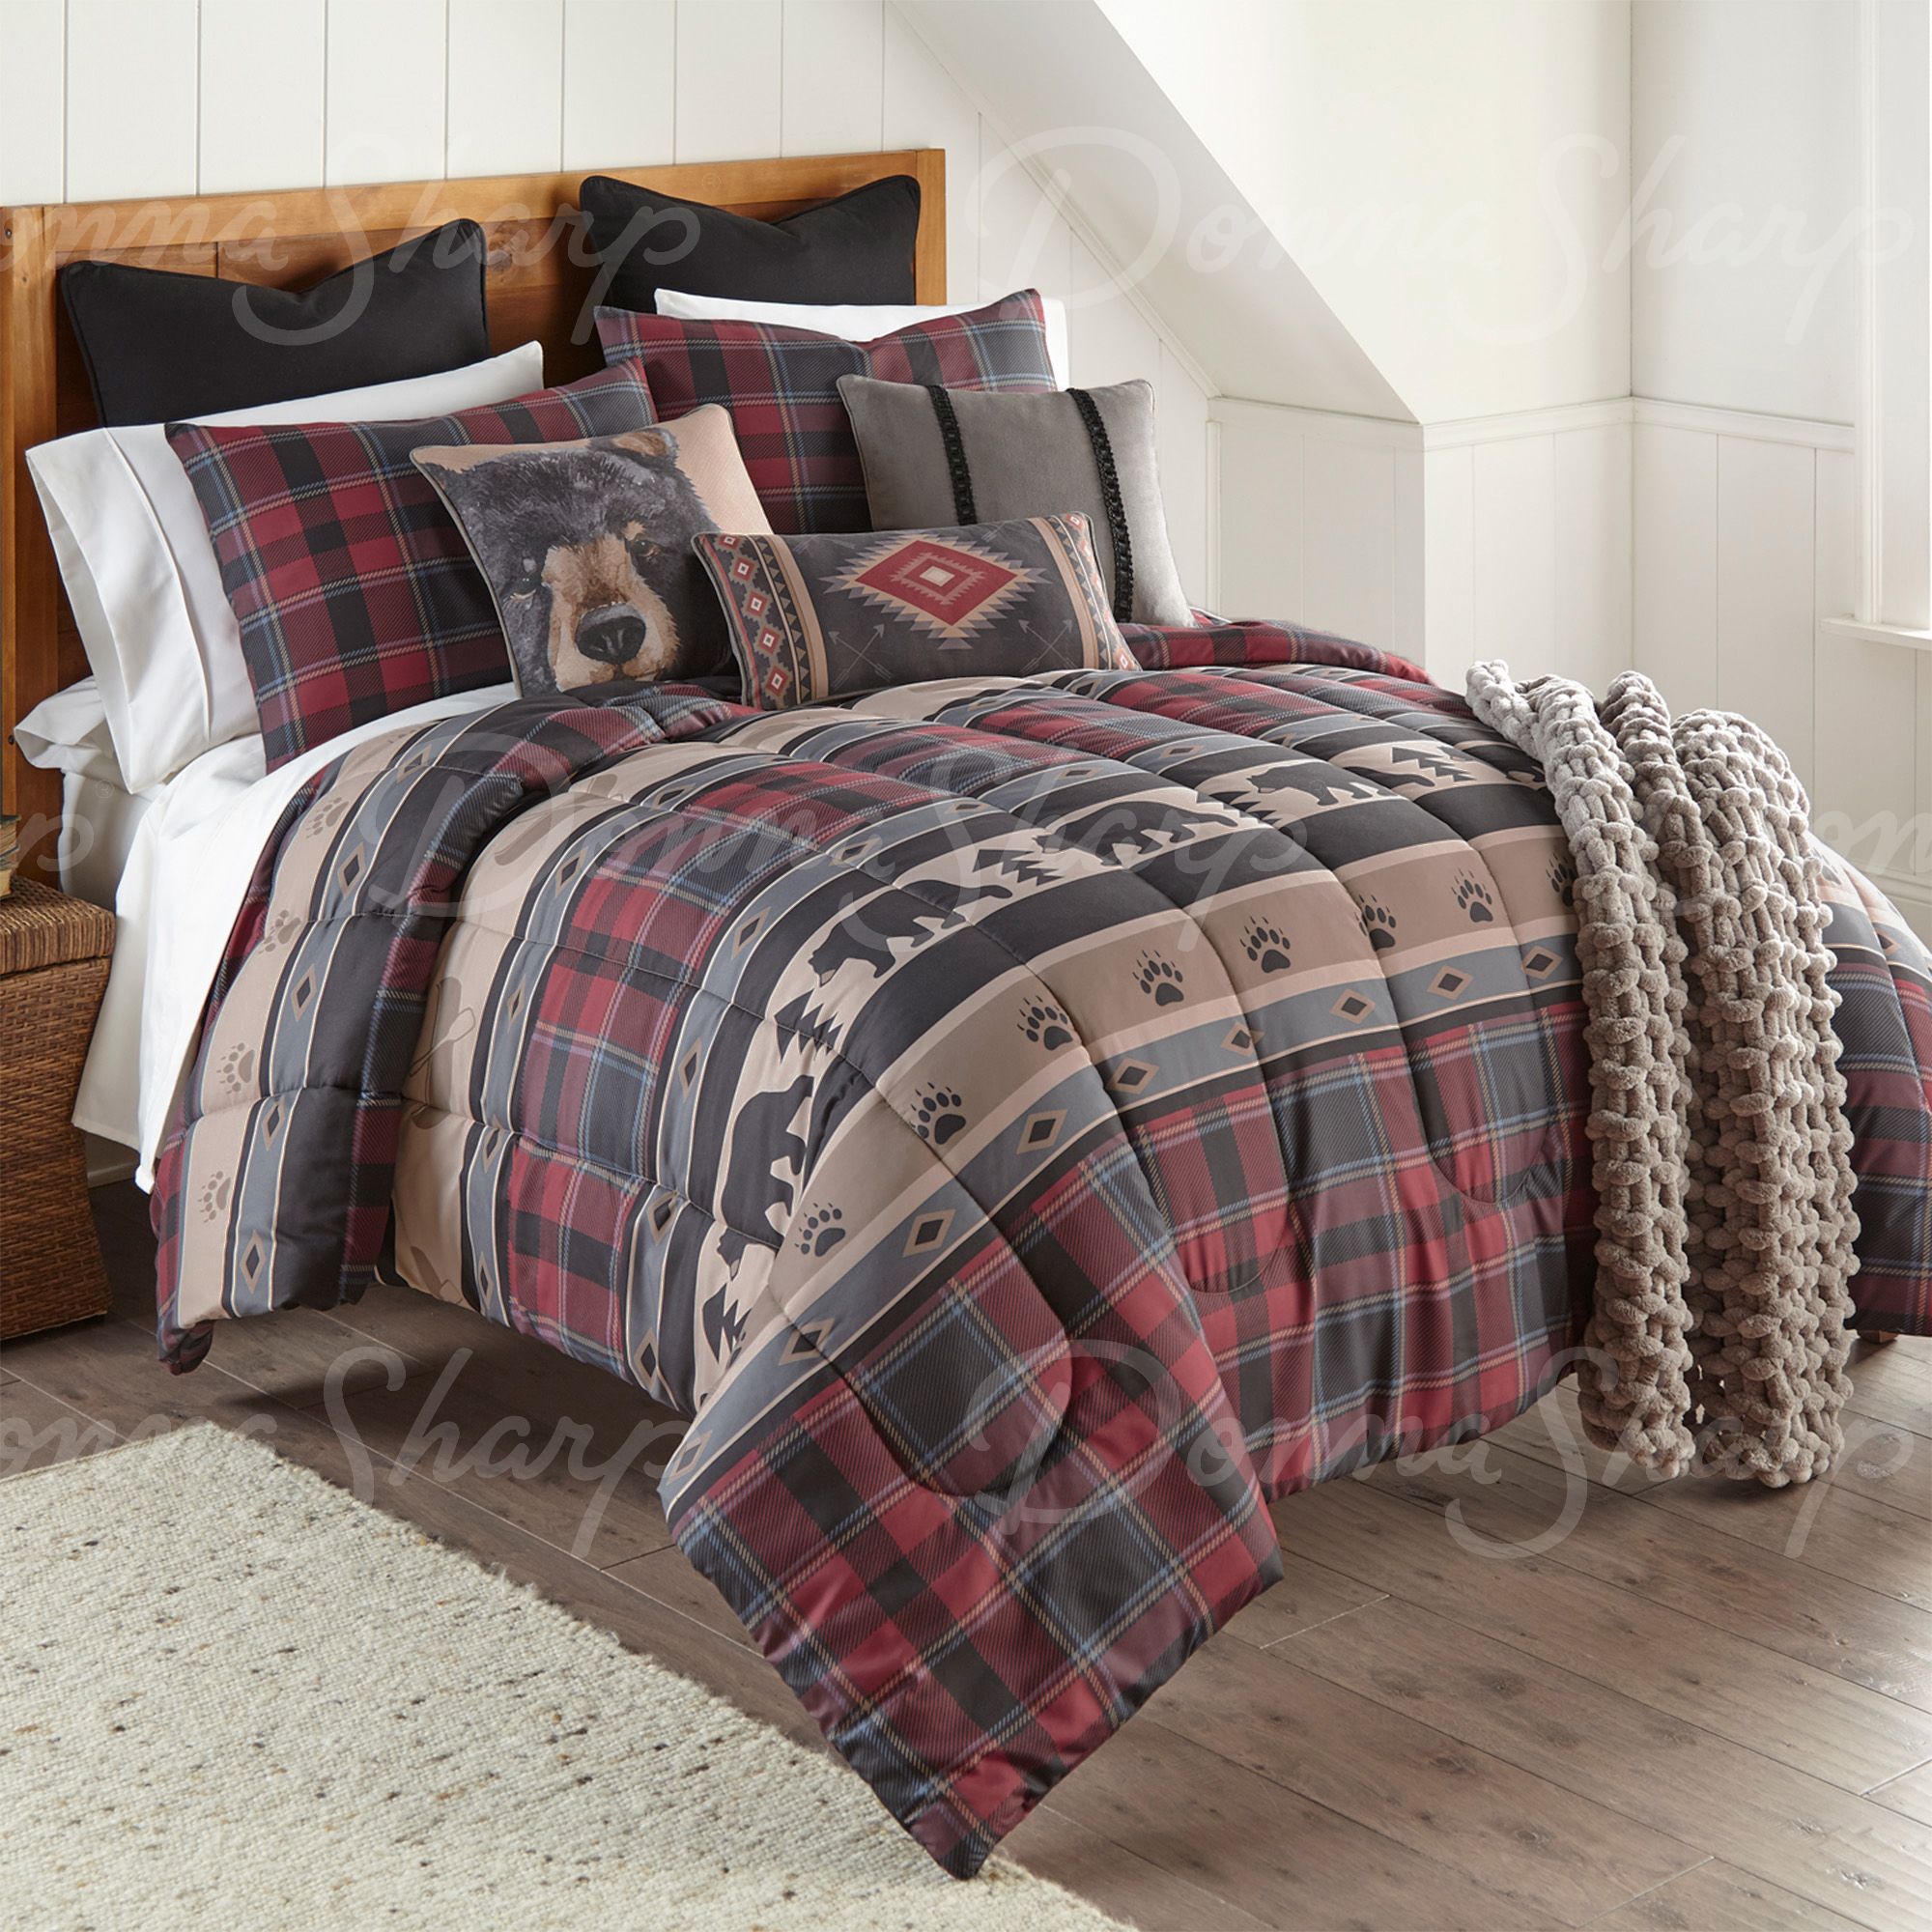 Donna Sharp Comforters and Bedding Accessories